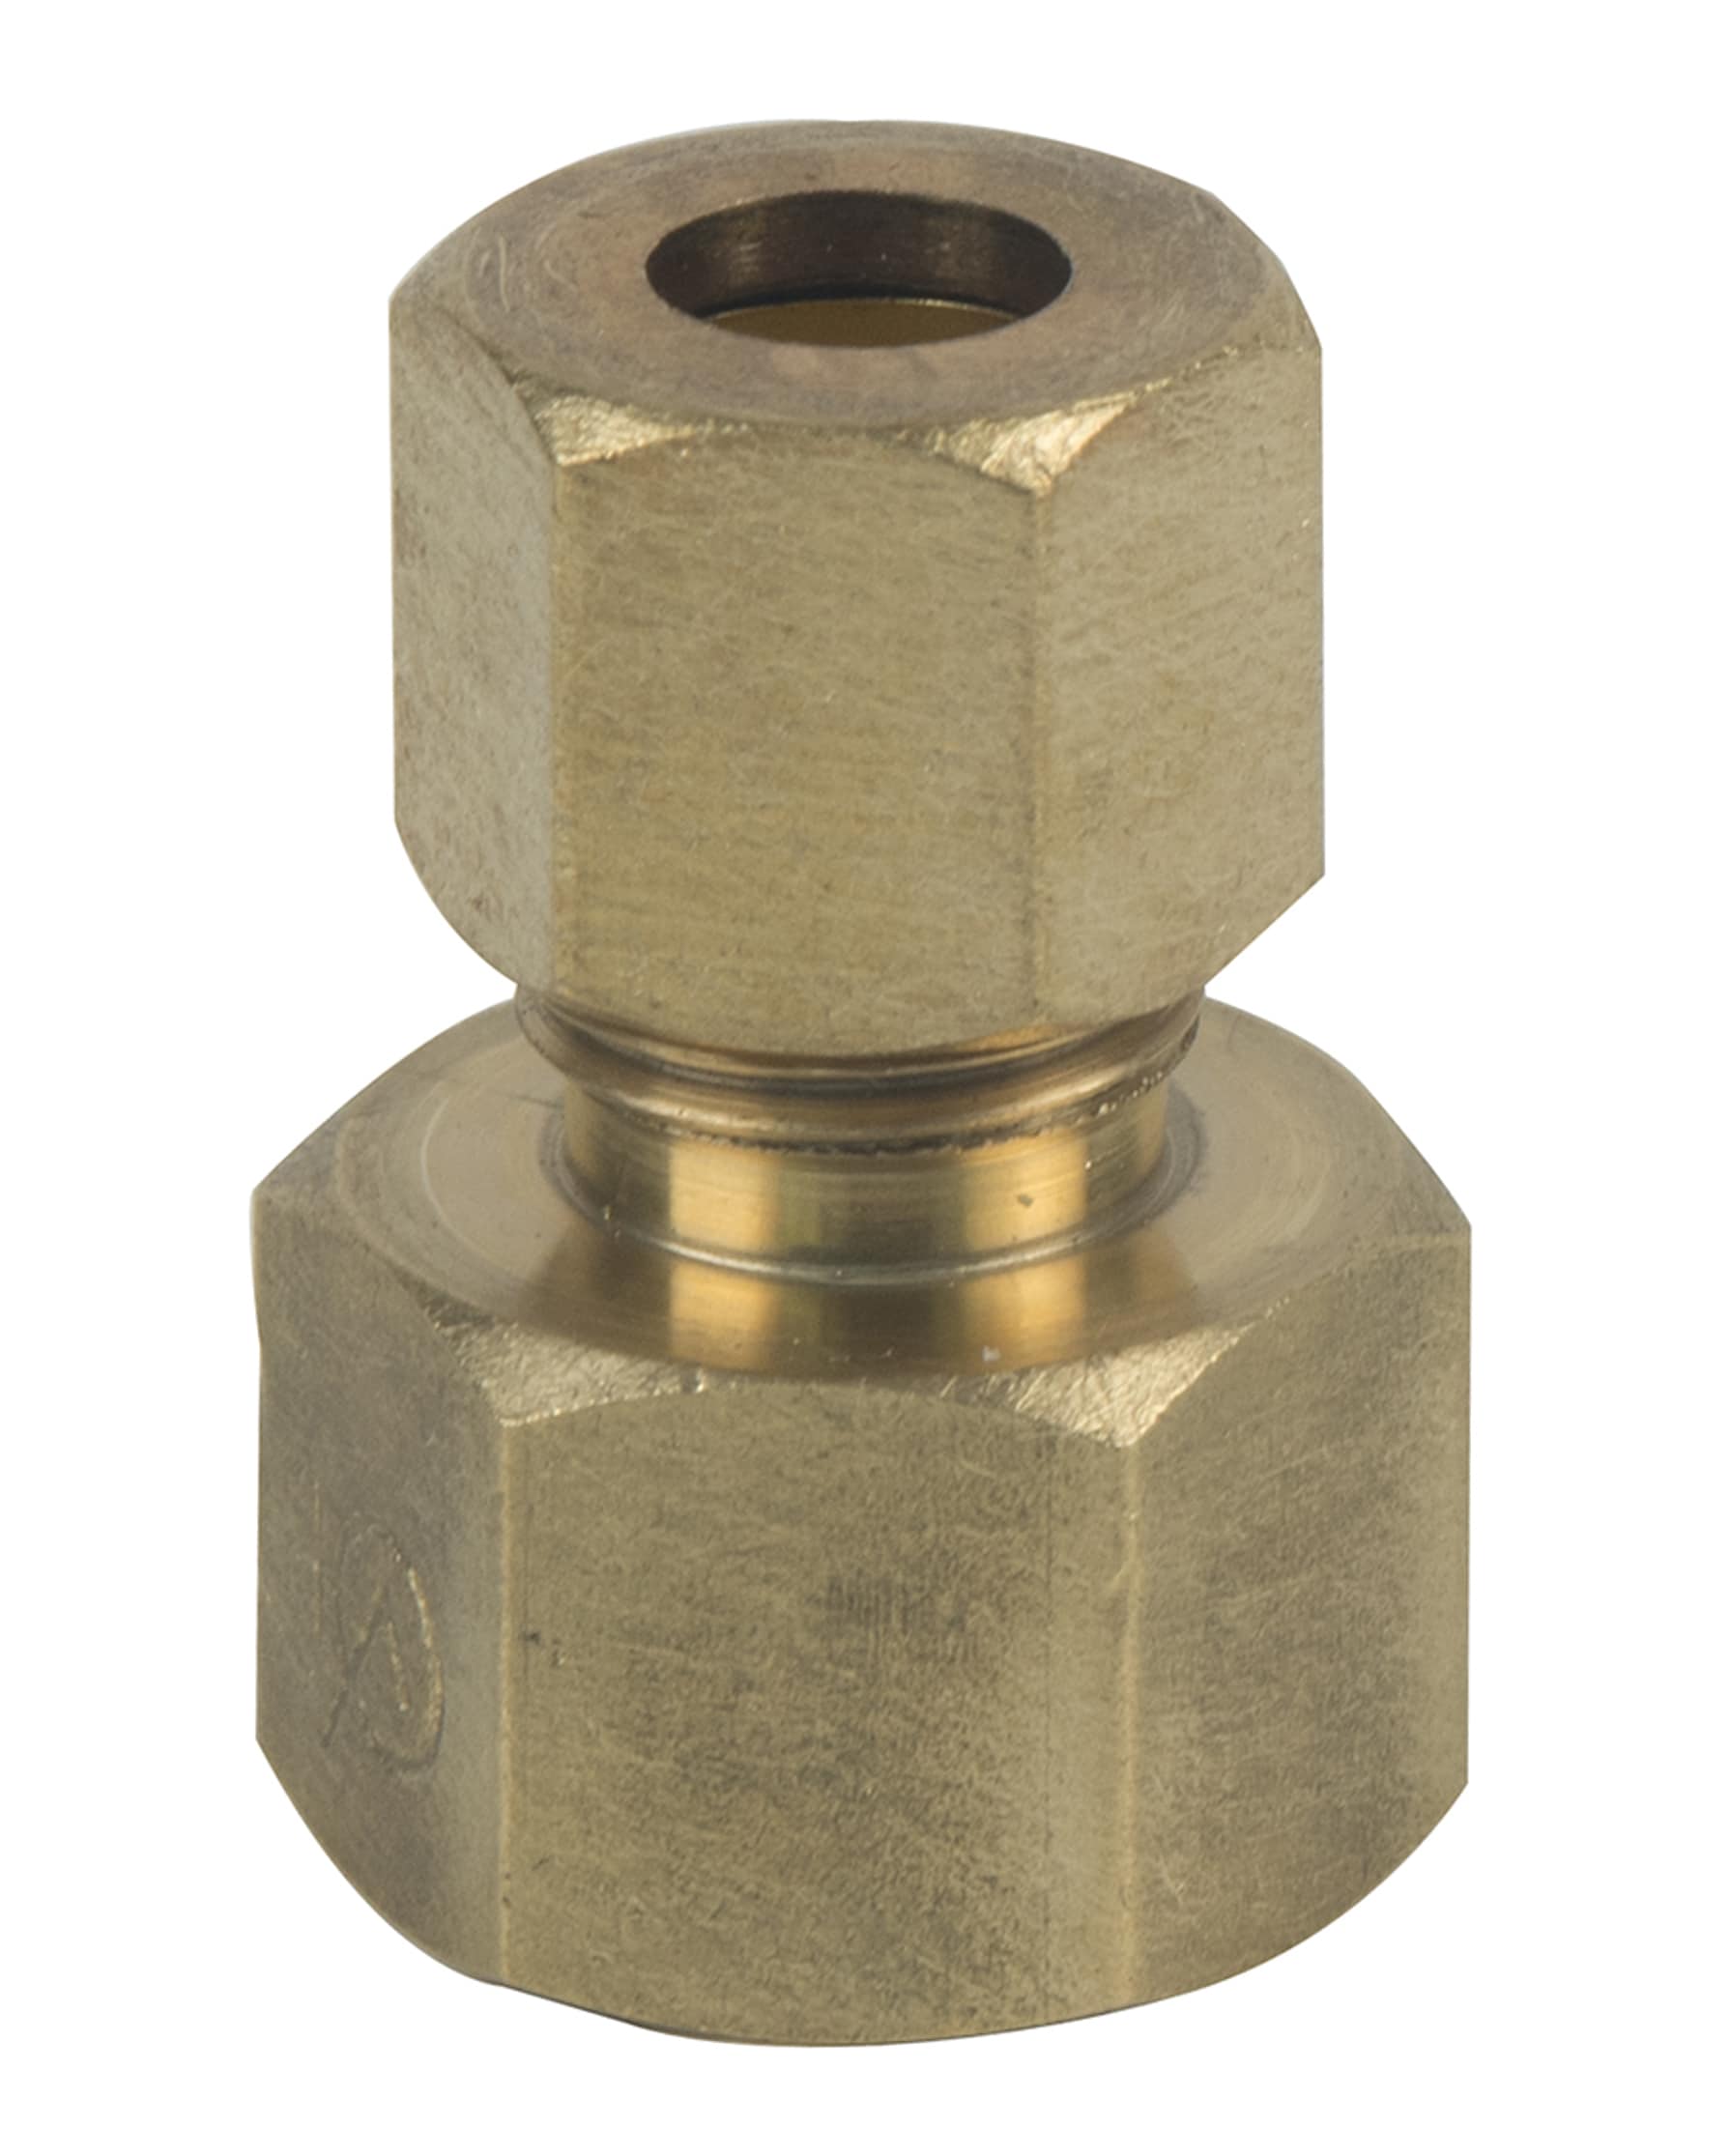 BrassCraft 3/8-in x 1/4-in Compression Reducing Union Coupling Fitting at